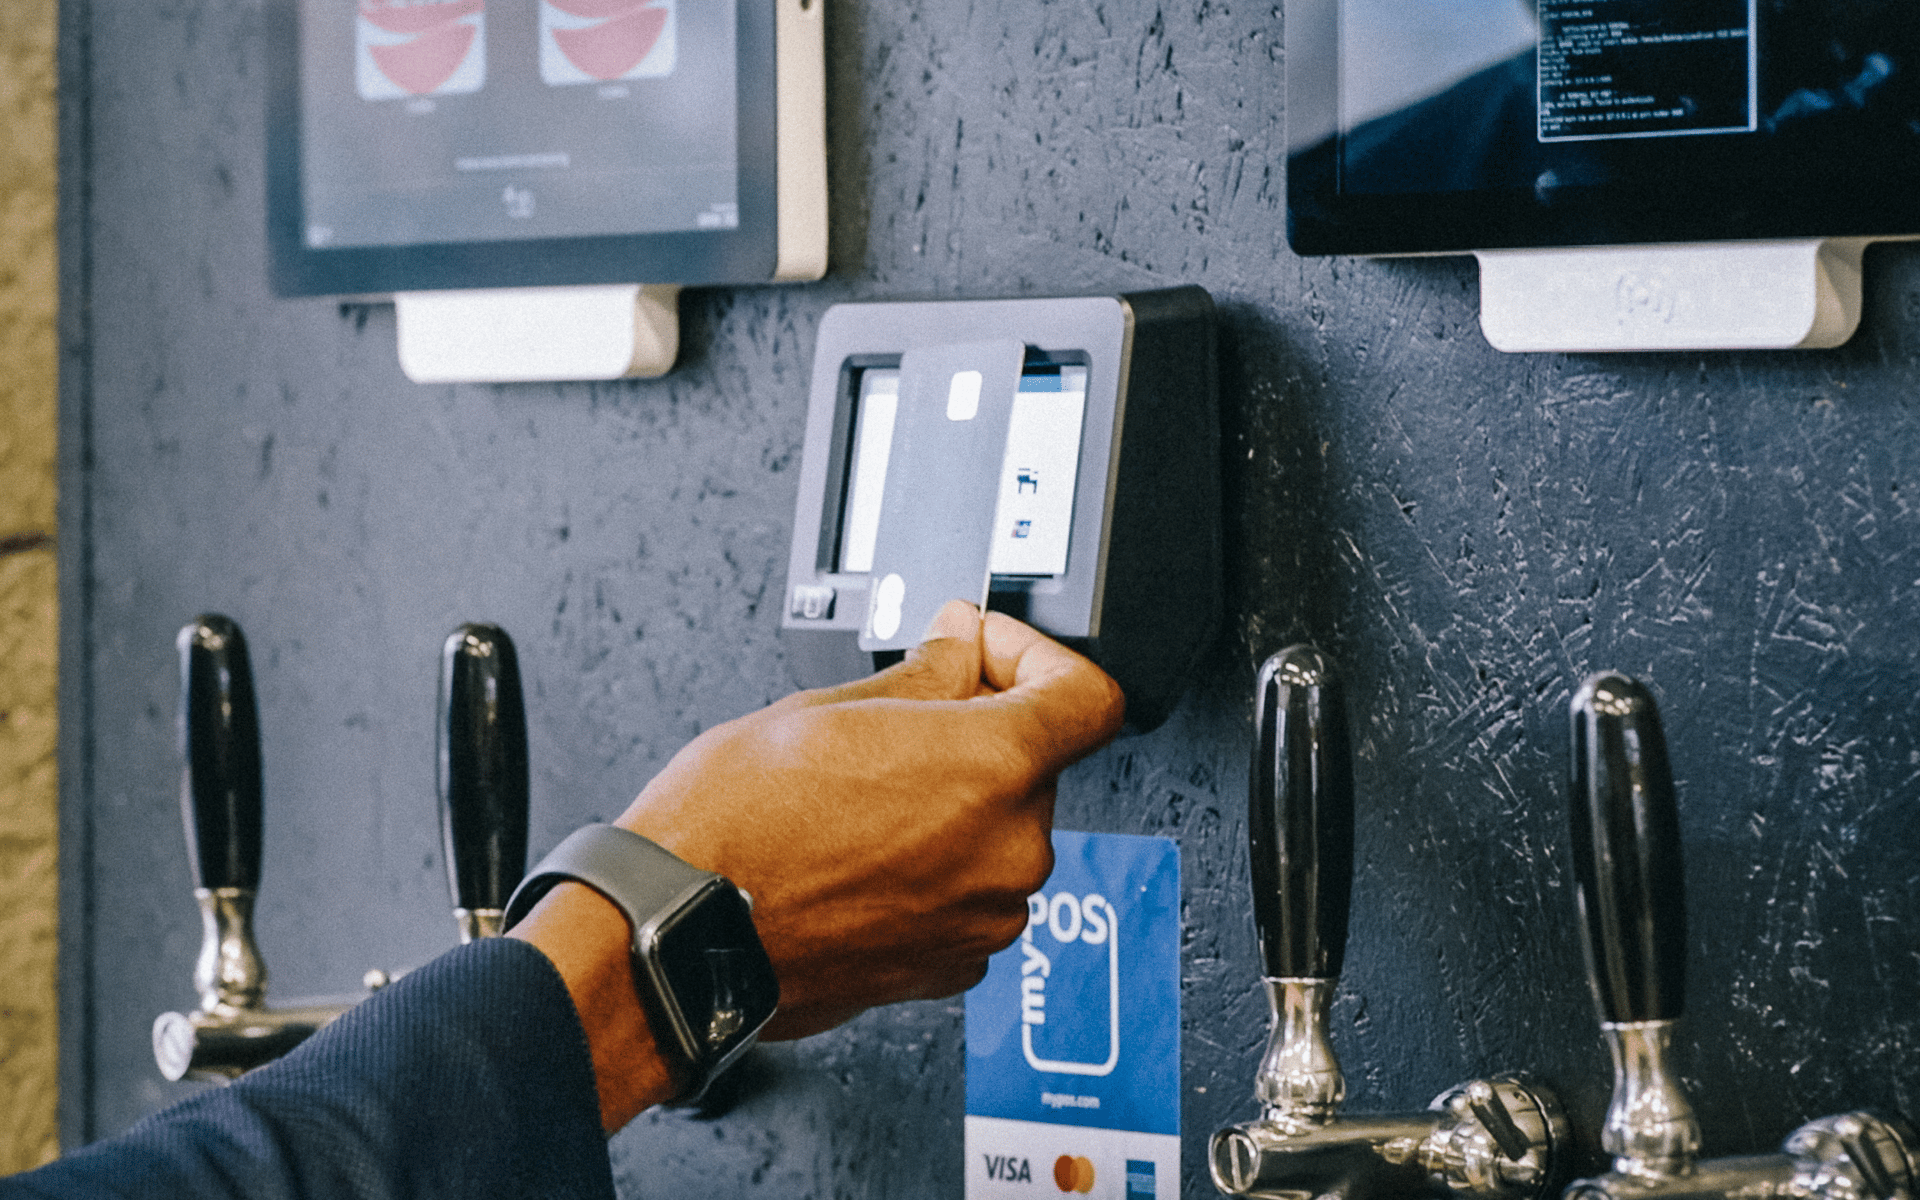 DRINKOTEC integrates card payment into its beverage dispensing systems